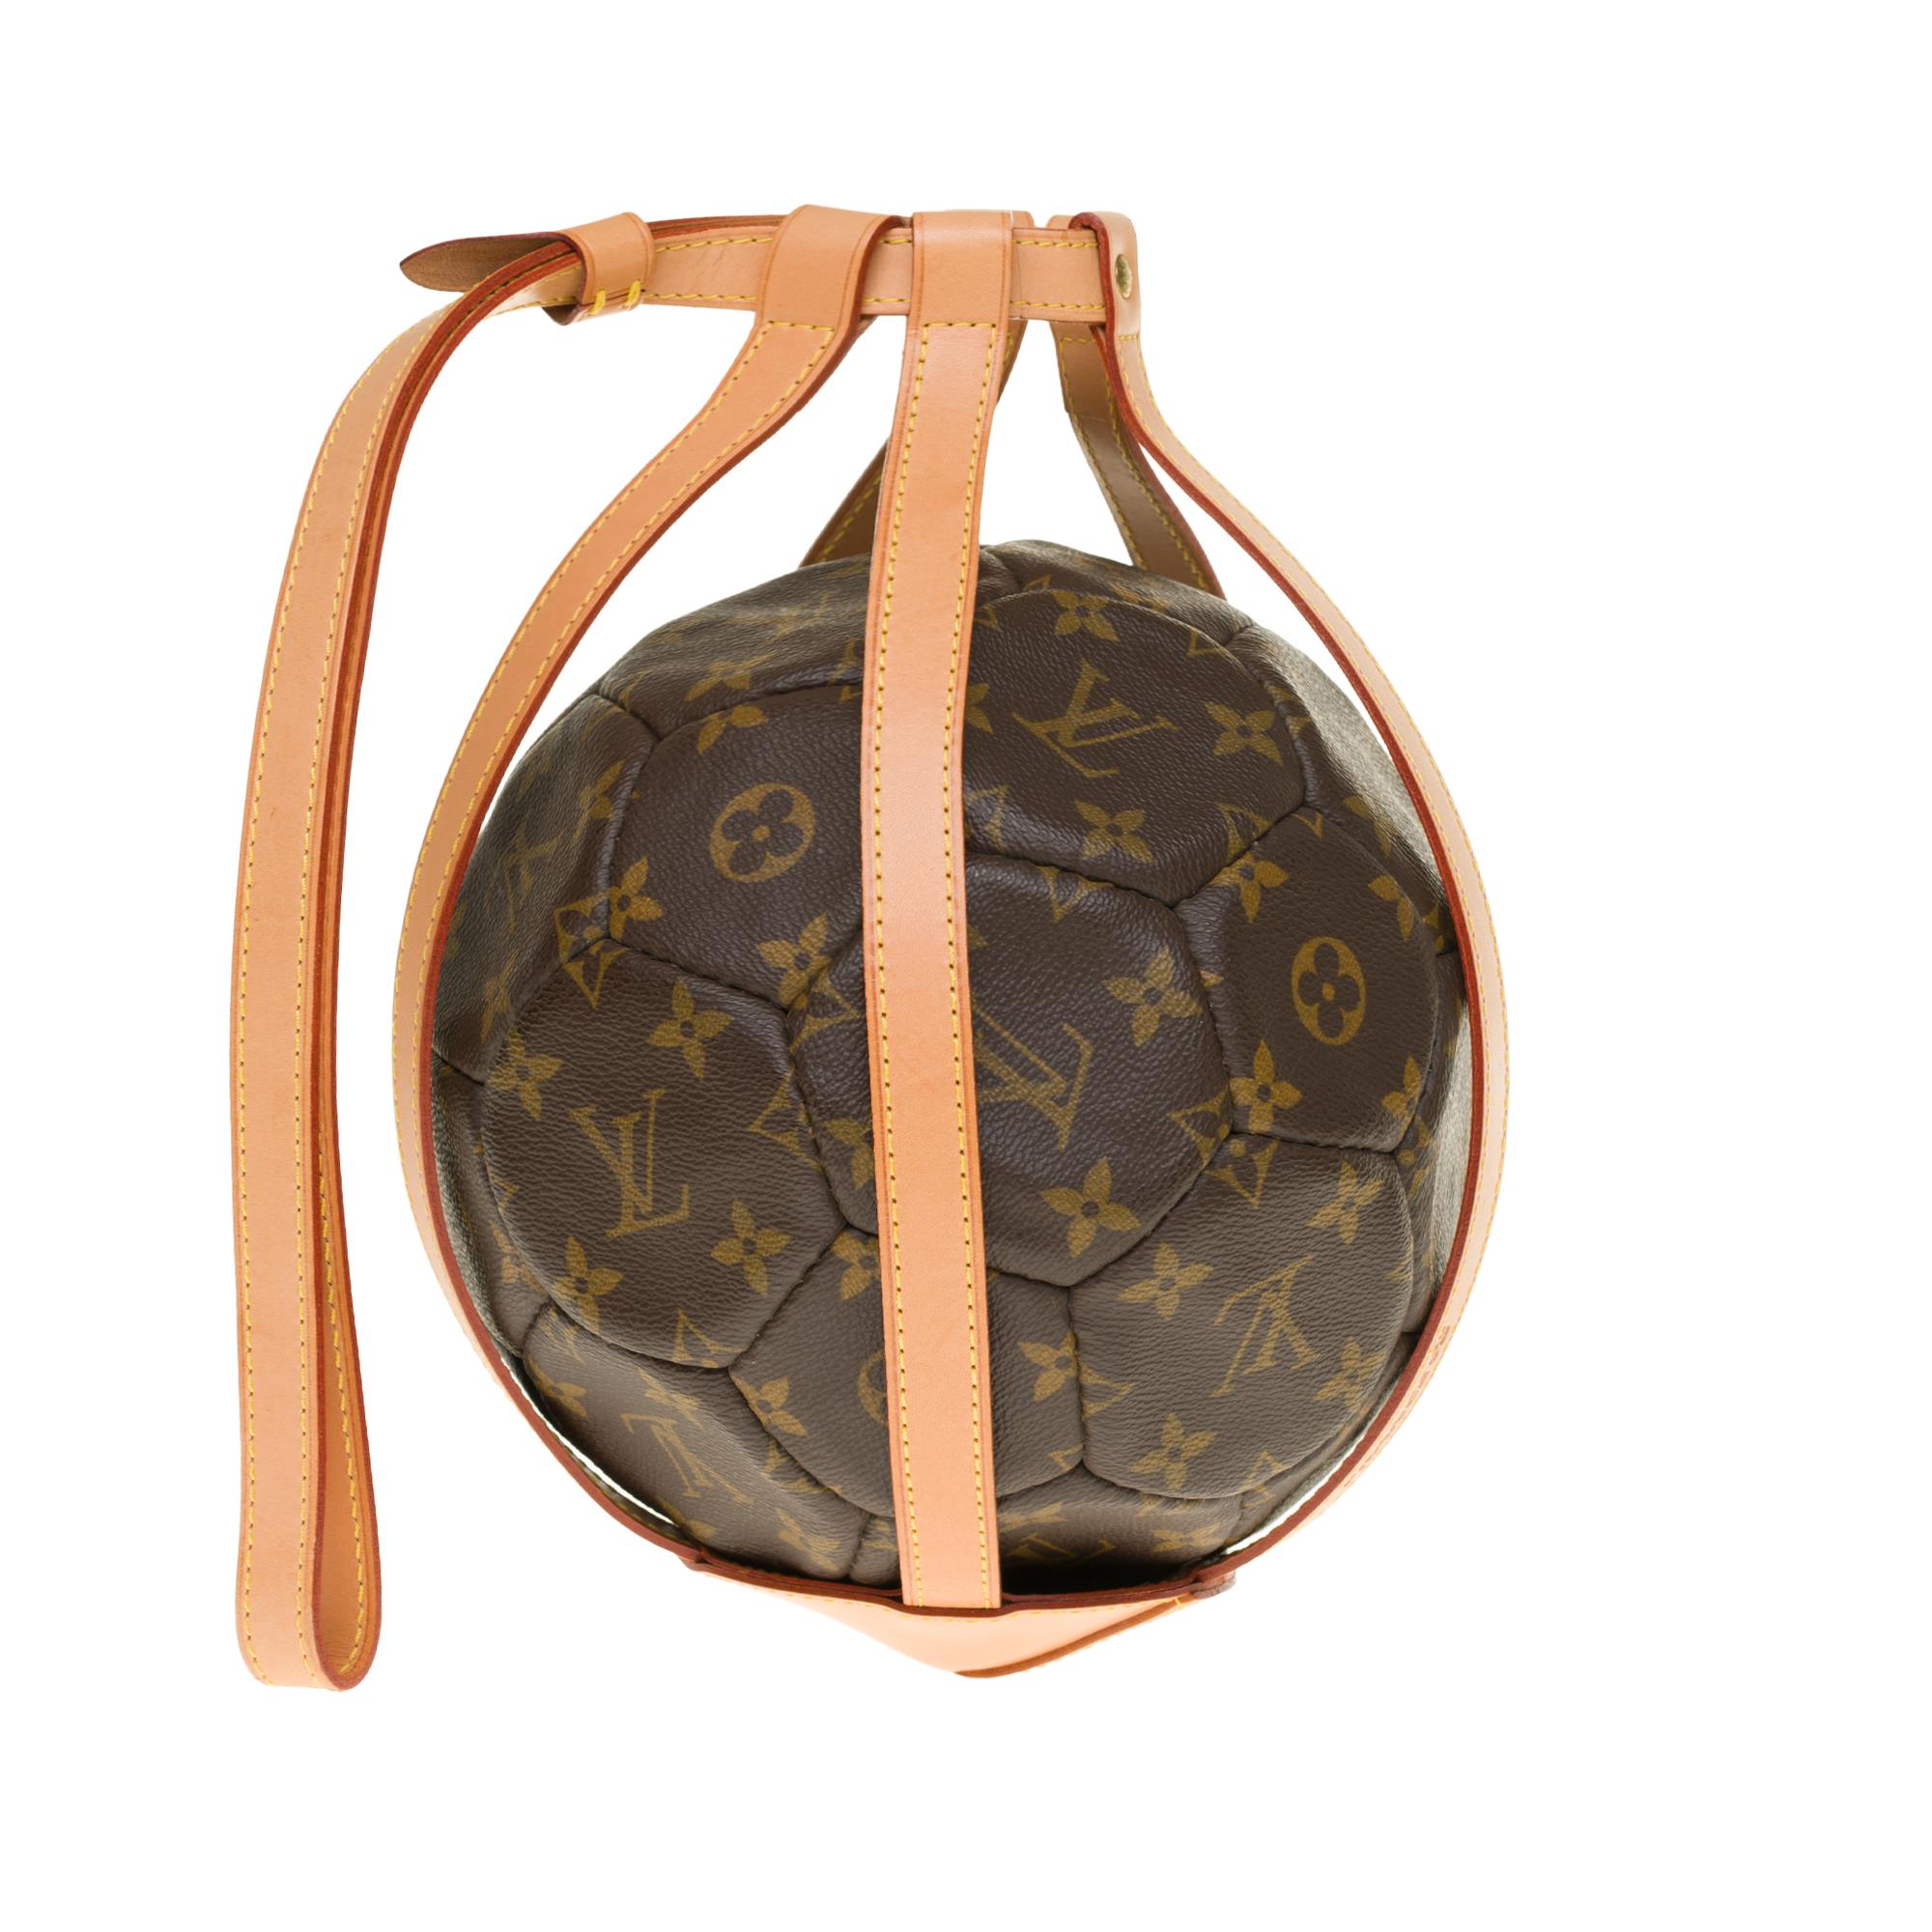 Rare Louis Vuitton World Cup ball & net in brown coated monogram canvas and natural leather, gold plated metal hardware, yellow stitching, carried hand or shoulder.

Leather tie closure.
Signature: 